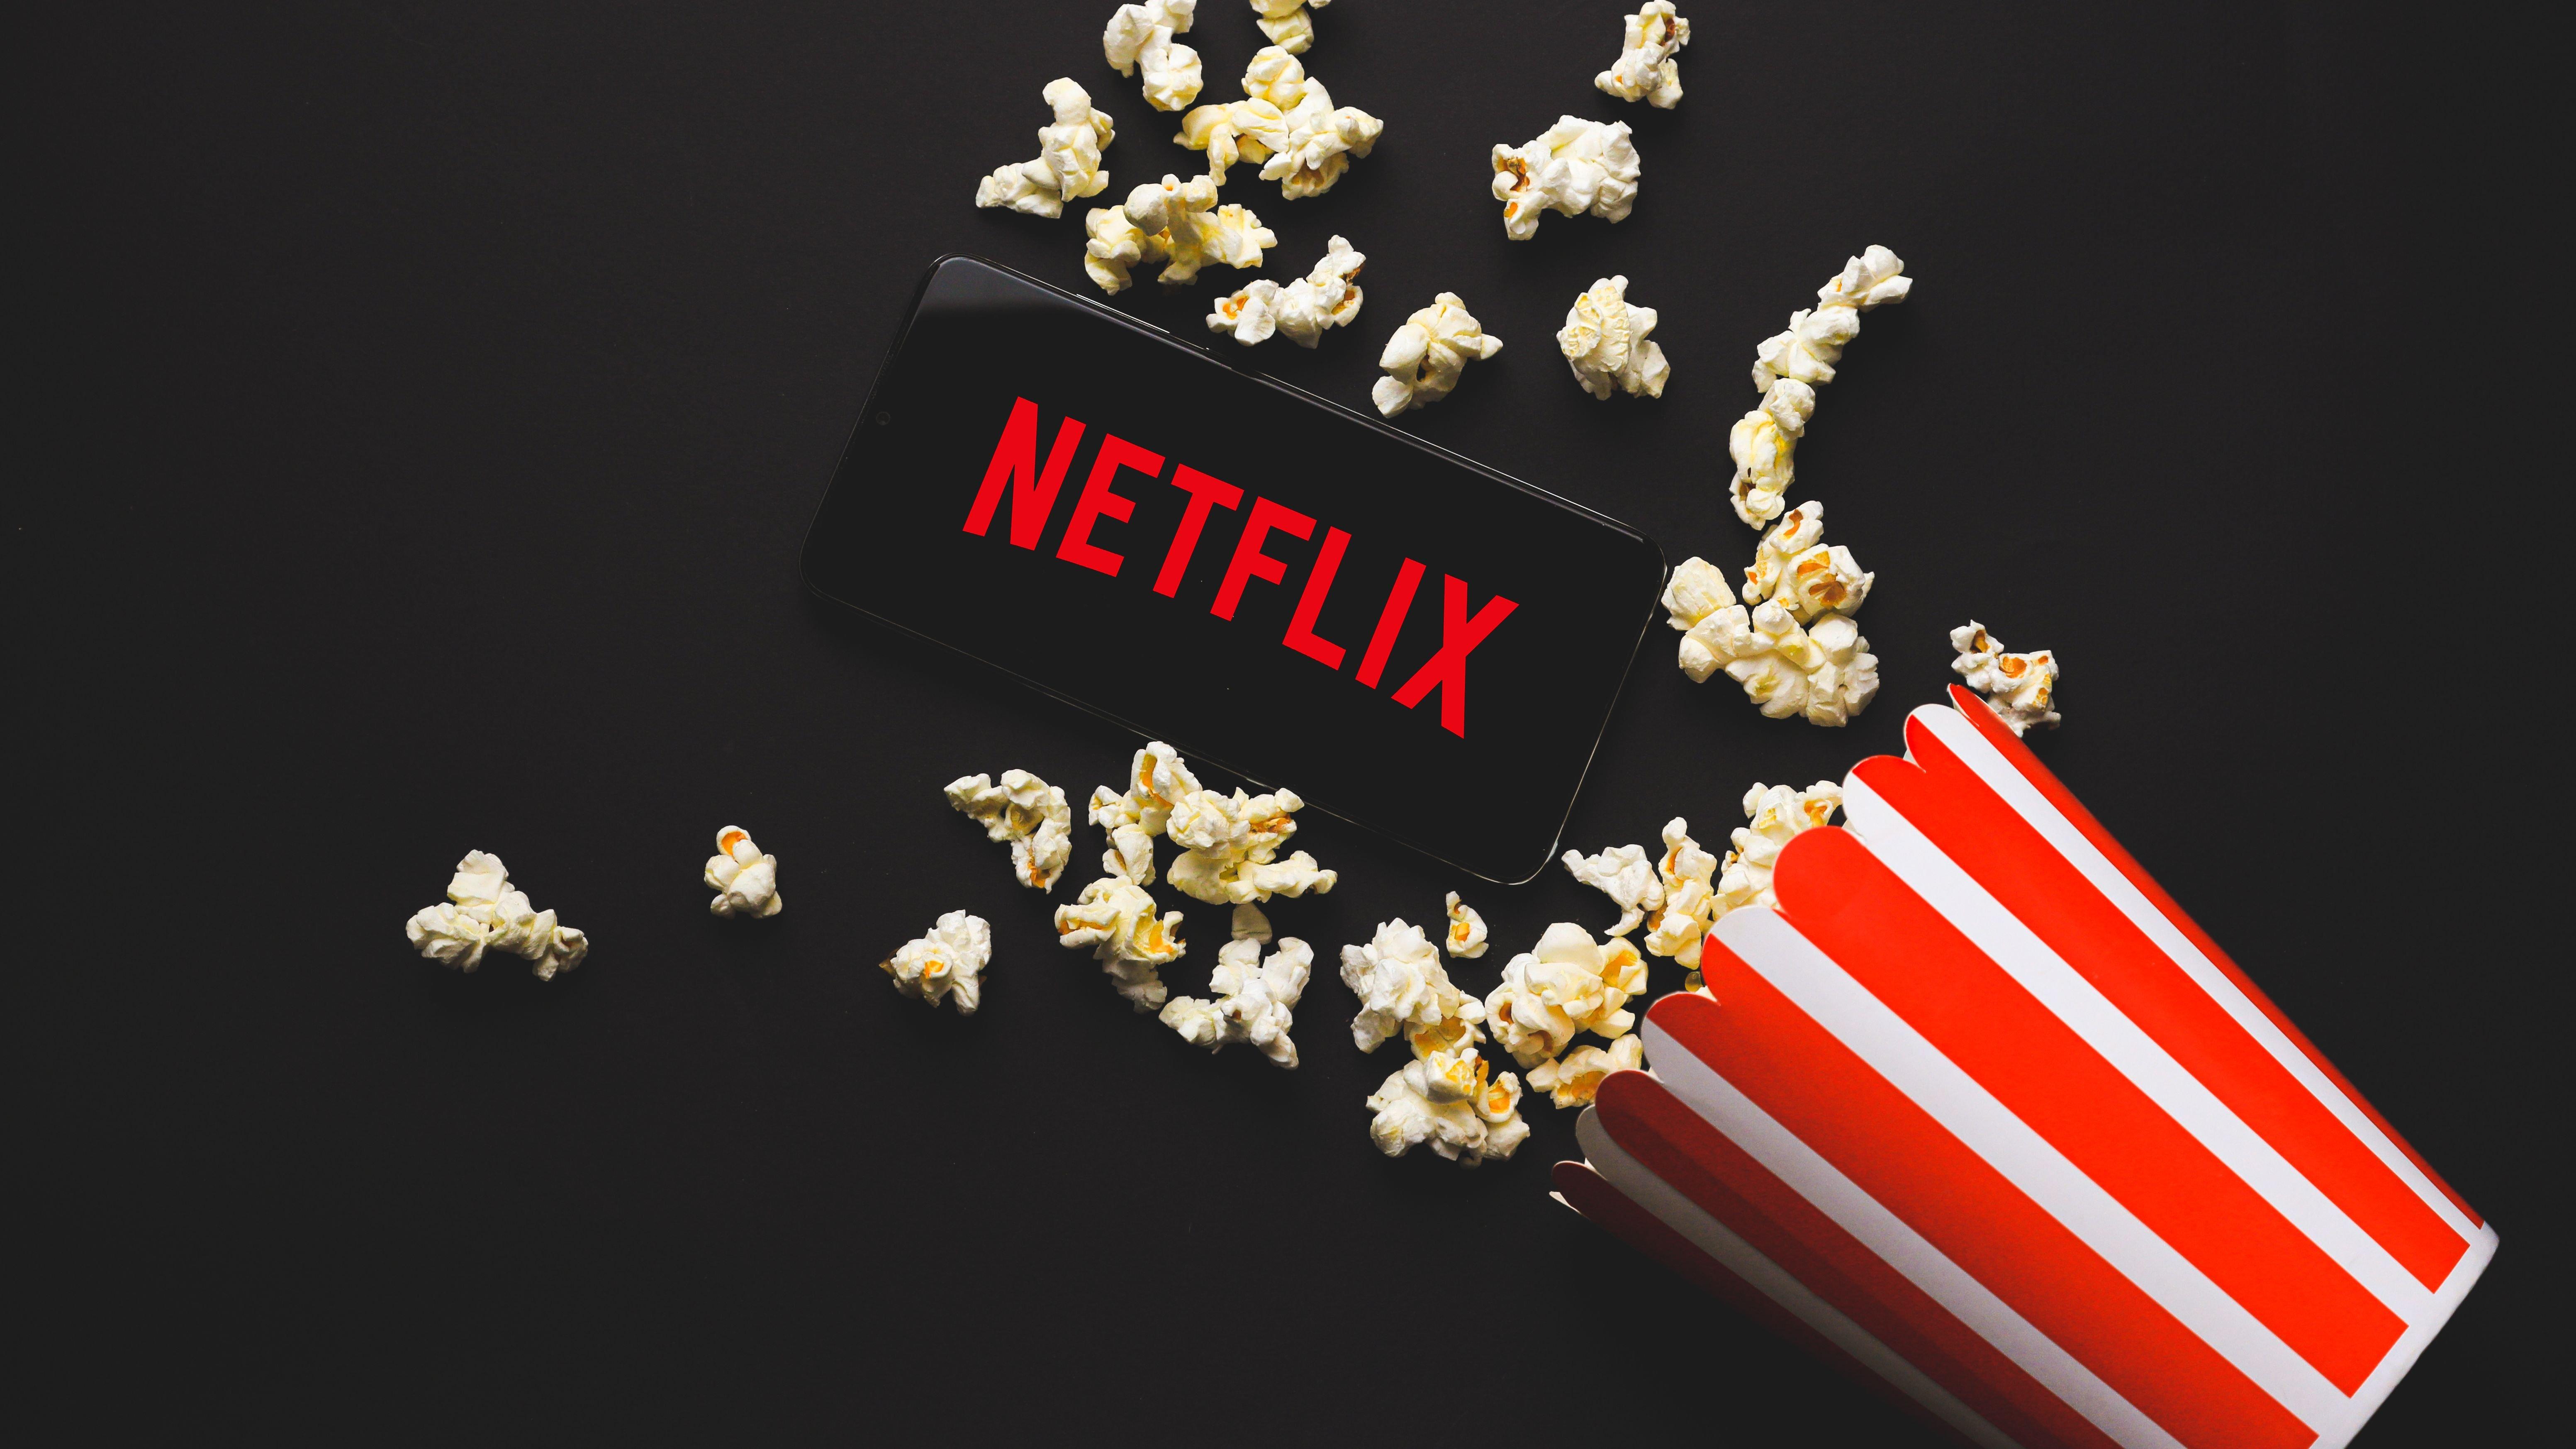 Netflix logo and a striped red & white popcorn cup with popcor flying out.